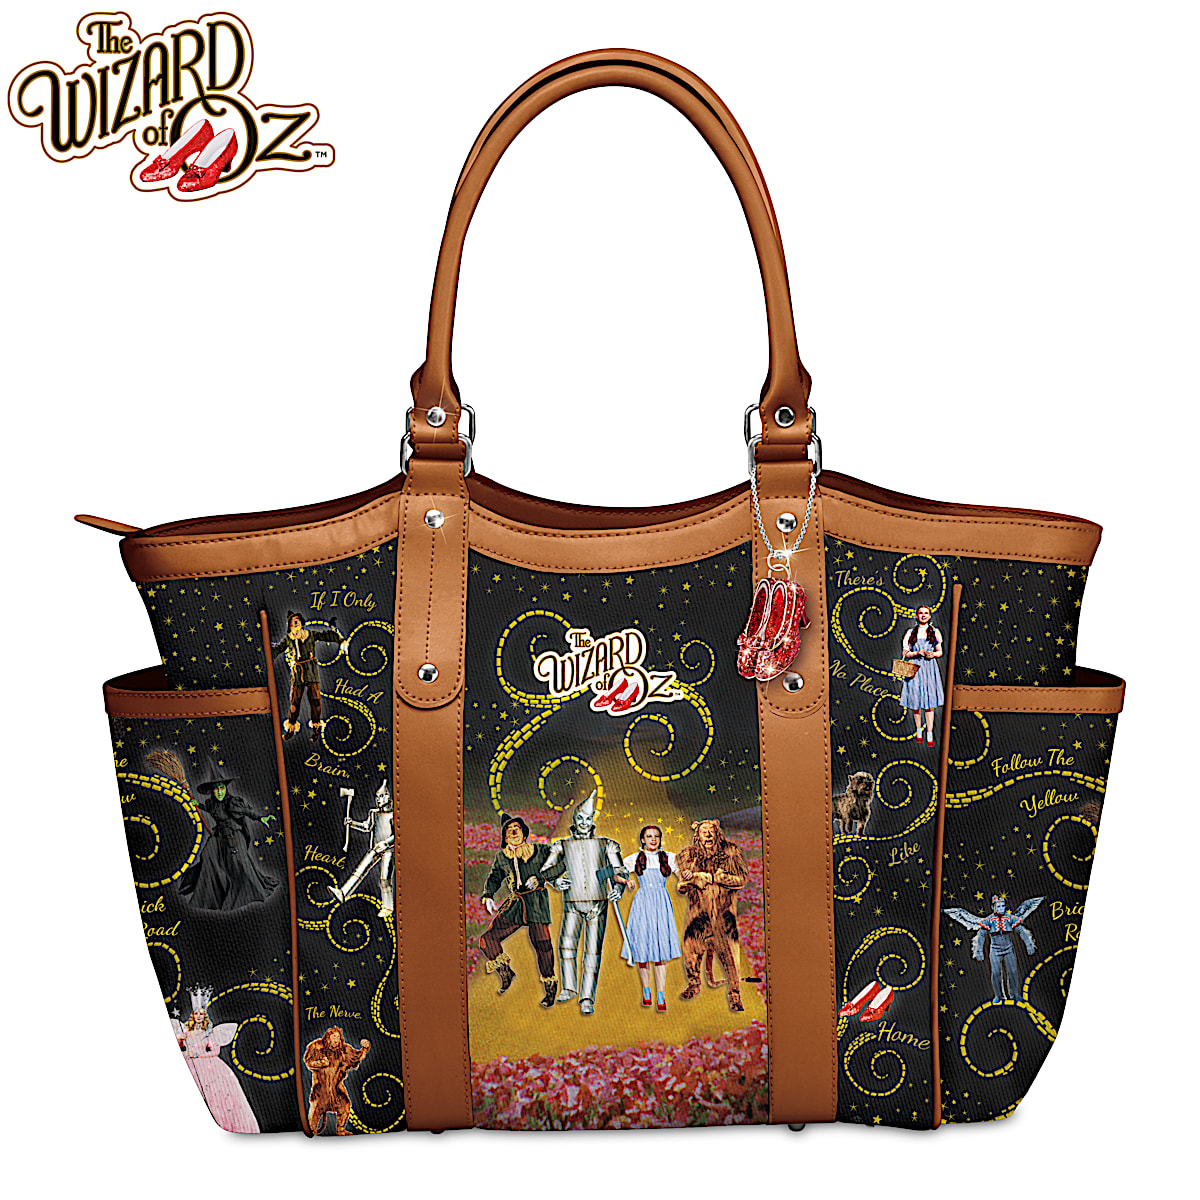 Vintage Girls The Wizard of Oz Purse collectable, about 8 x 6 inches | eBay